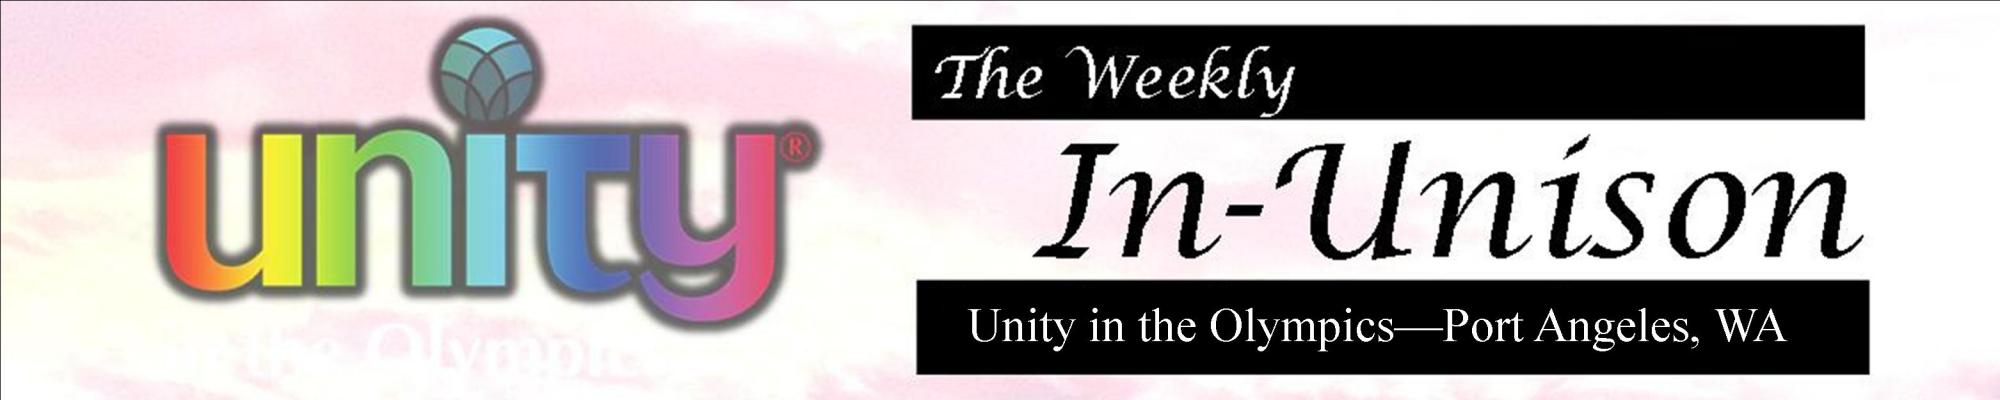 The Weekly IN-UNISON January 17th Edition